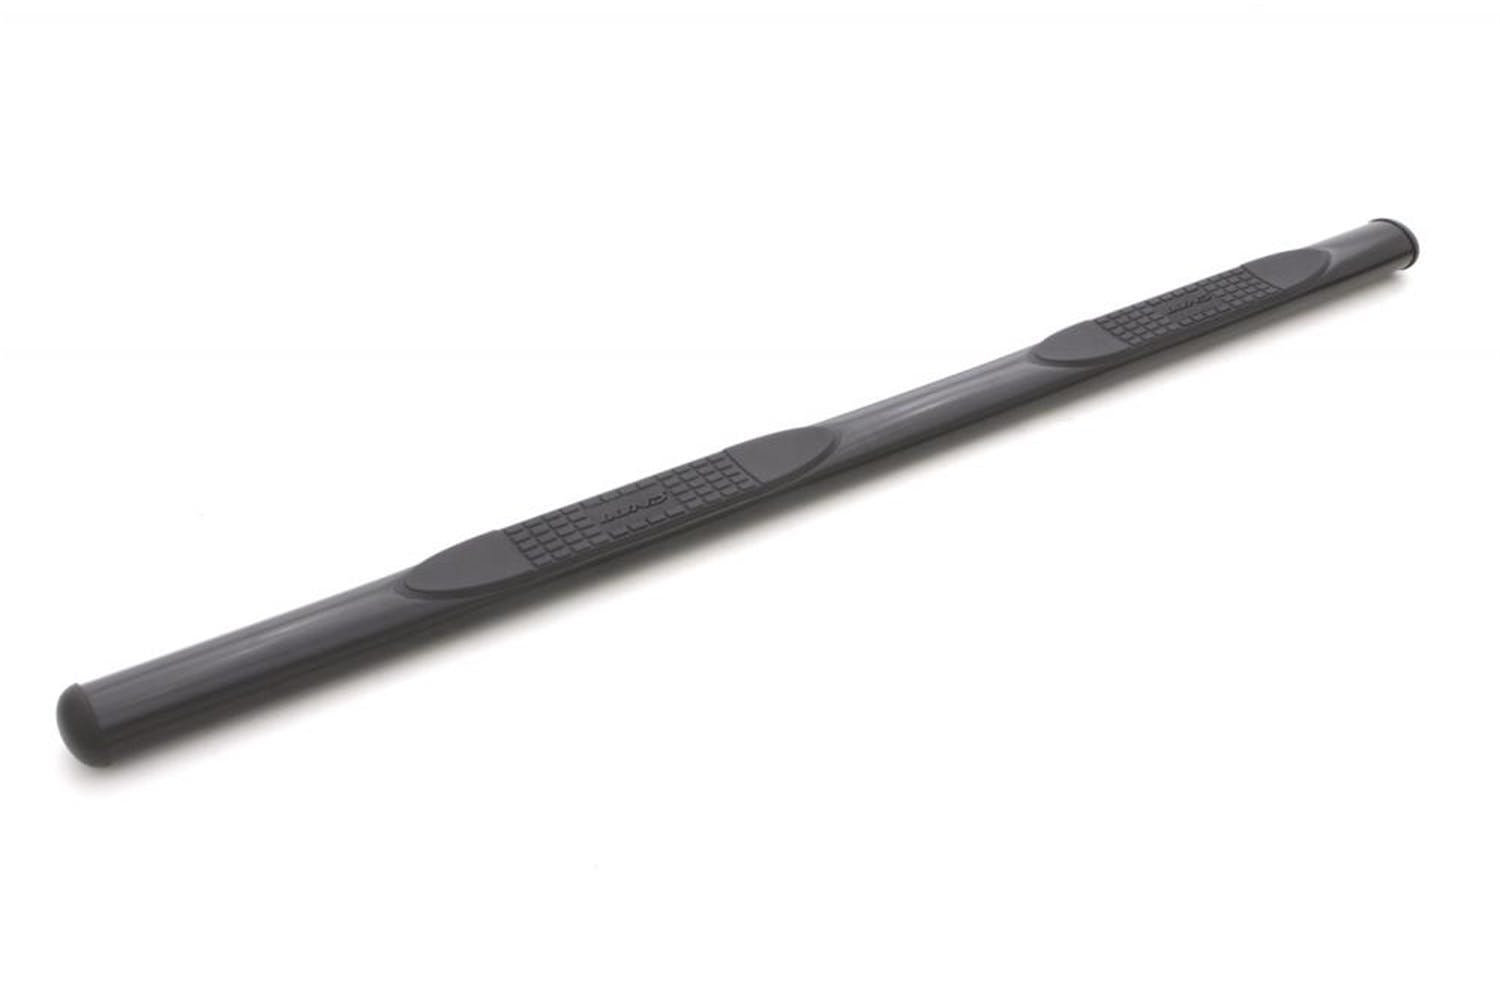 LUND 23684782 4 Inch Oval Straight Nerf Bar - Black 4 In OVAL STRAIGHT STEEL